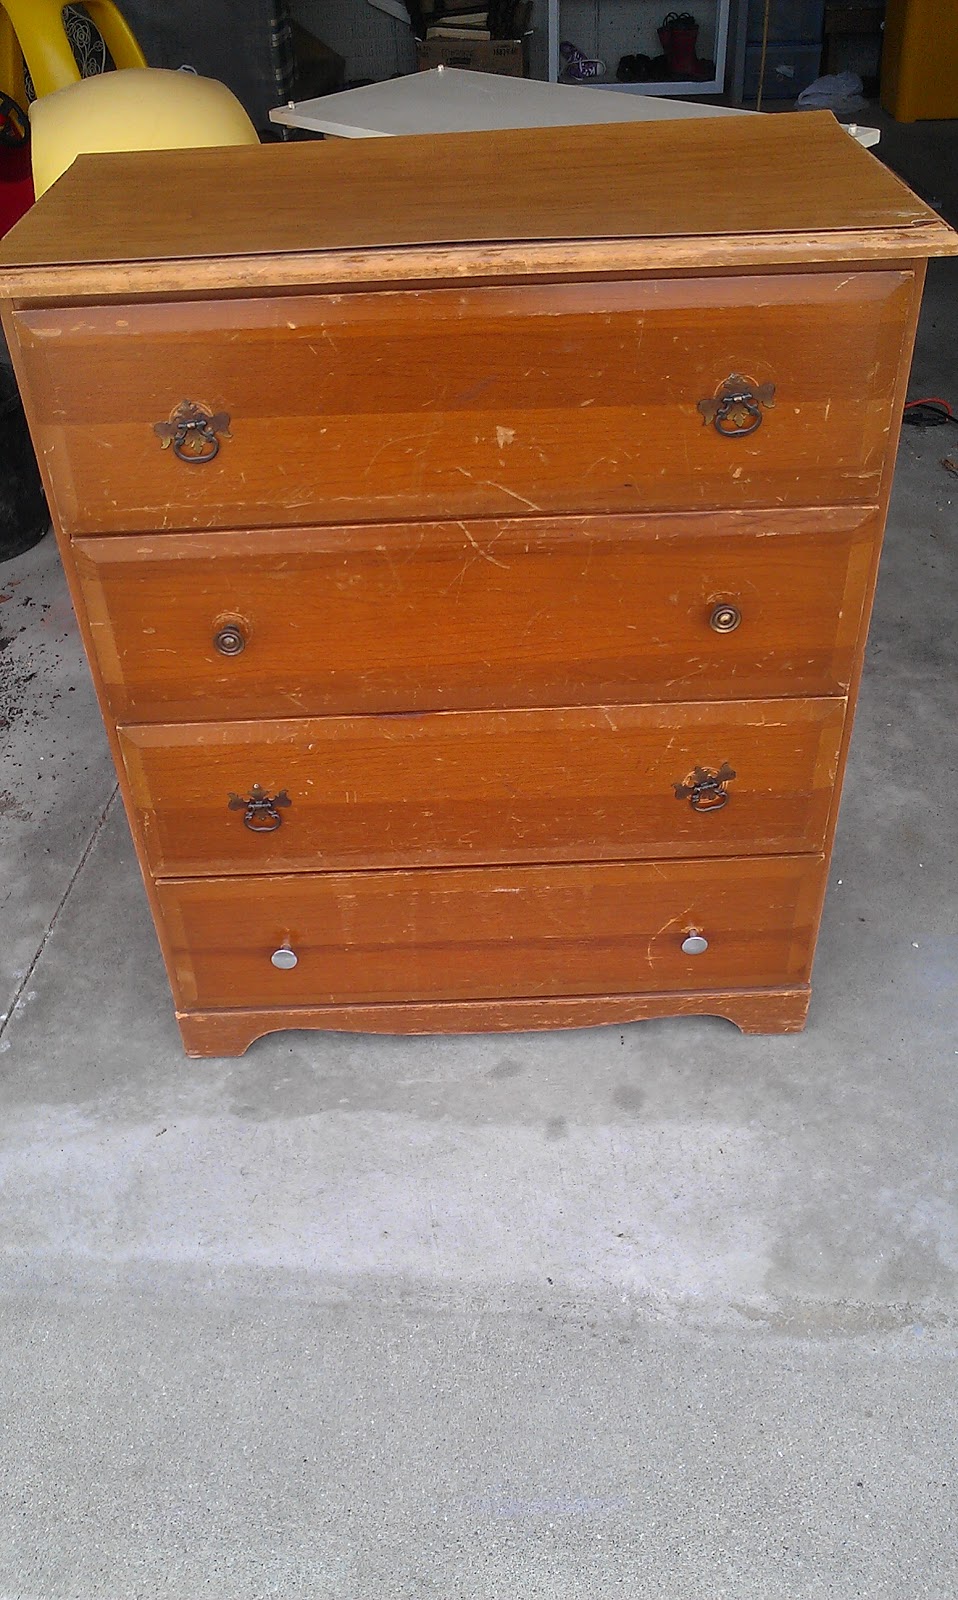 Thrifty Treasures How To Dress Up A Dresser